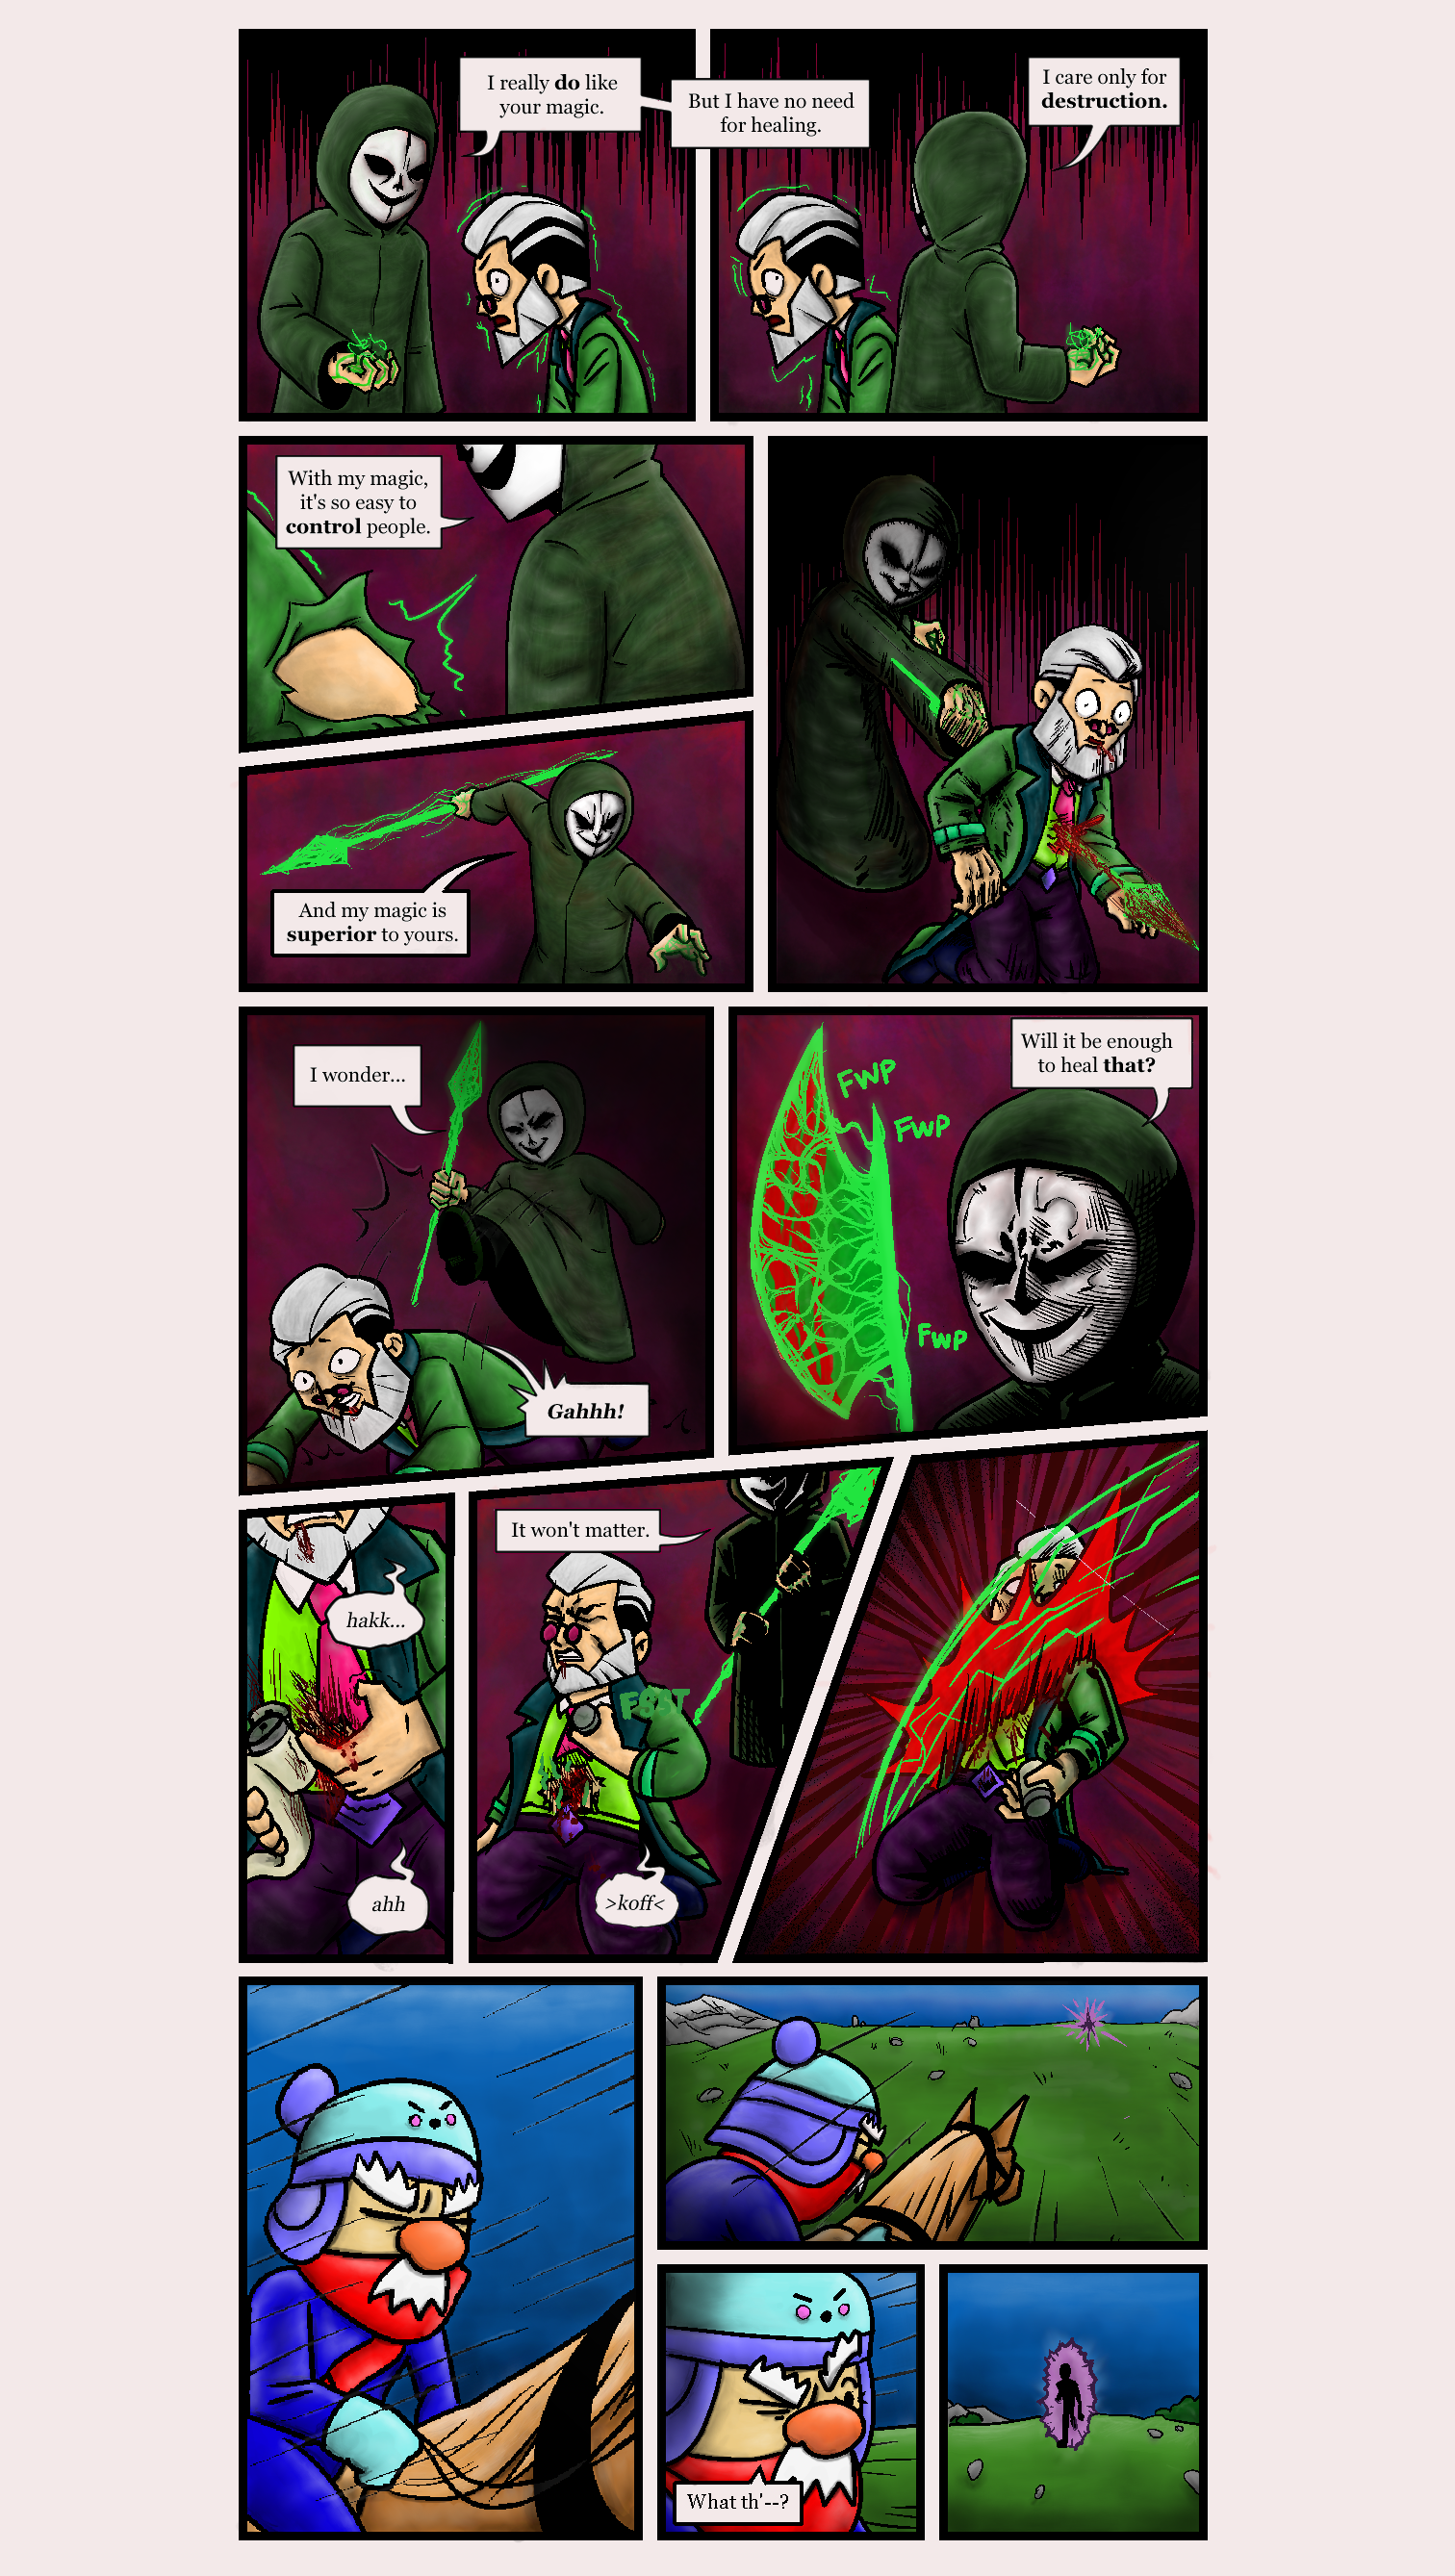 ch27/pg23.png. If you're seeing this, enable images. Or, perhaps we have a website issue. Try refreshing, if unsuccessful email c@commodorian.org with a detailed description of how you got here.